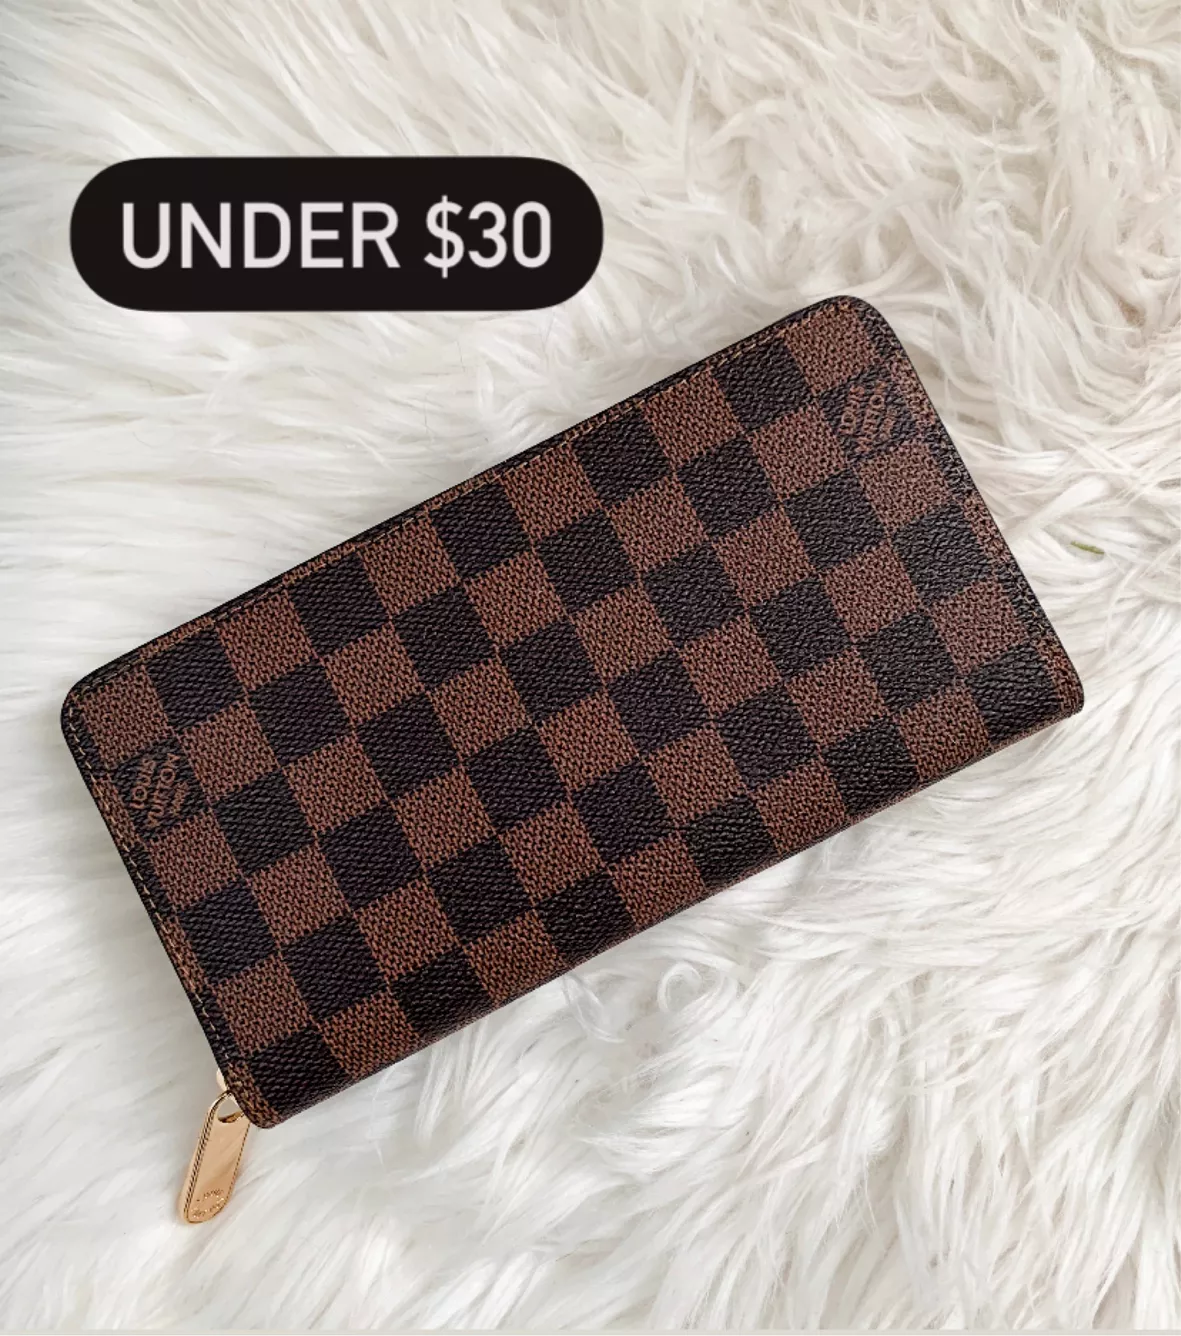 Louis Vuitton Checked Wallets for Women